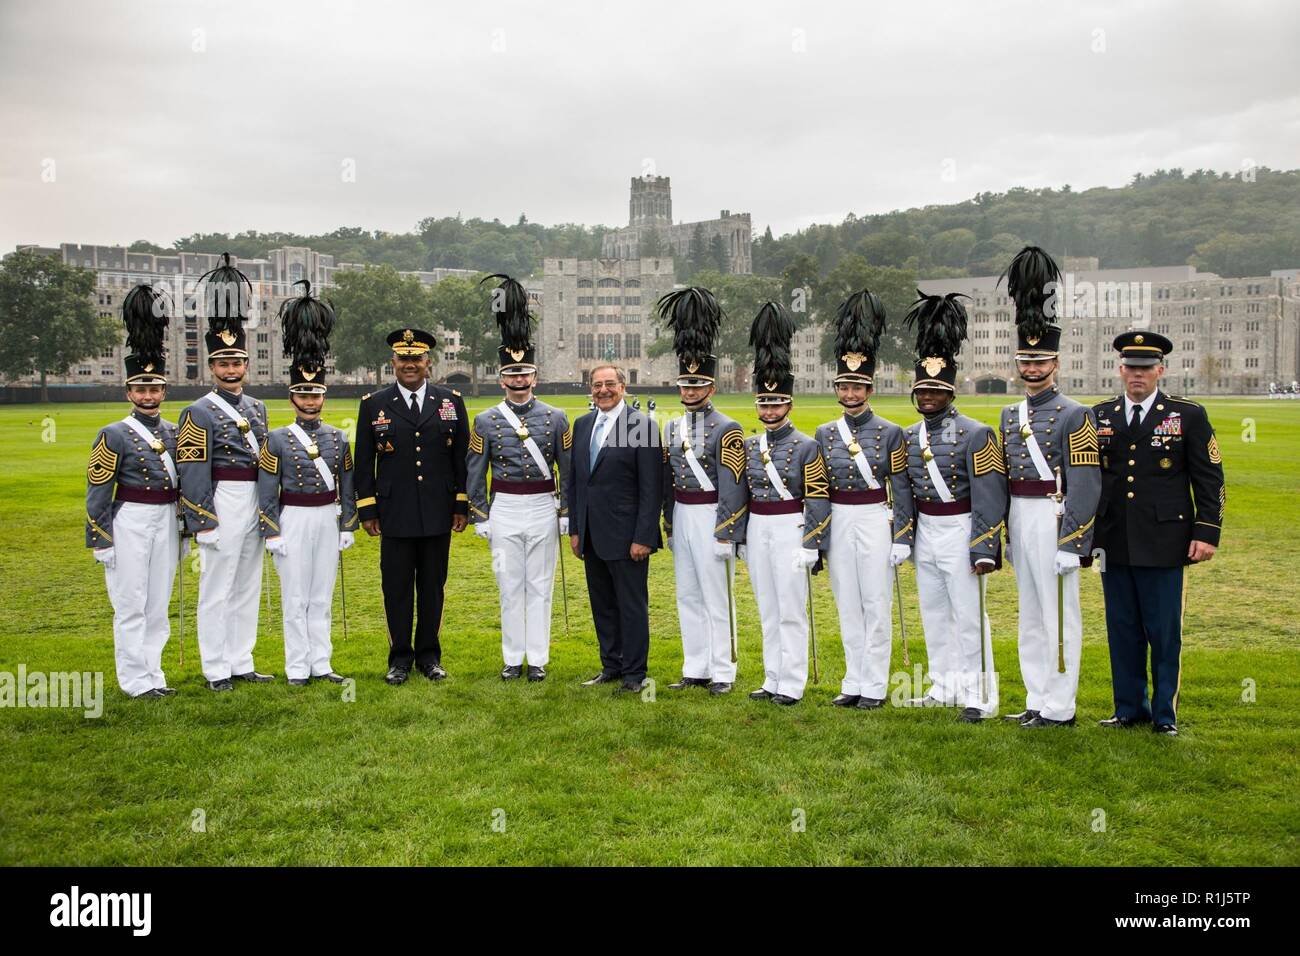 The 23rd U.S. Secretary of Defense Leon Panetta receives the 2018 Sylvanus Thayer Award presented by the West Point Association of Graduates, Oct. 4, 2018 at the U.S. Military Academy at West Point. The Thayer Award is given to a citizen of the United States, other than a West Point graduate, whose outstanding character, accomplishments, and stature in the civilian community draw wholesome comparison to the qualities for which West Point strives, in keeping with its motto: “Duty, Honor, Country.” Stock Photo